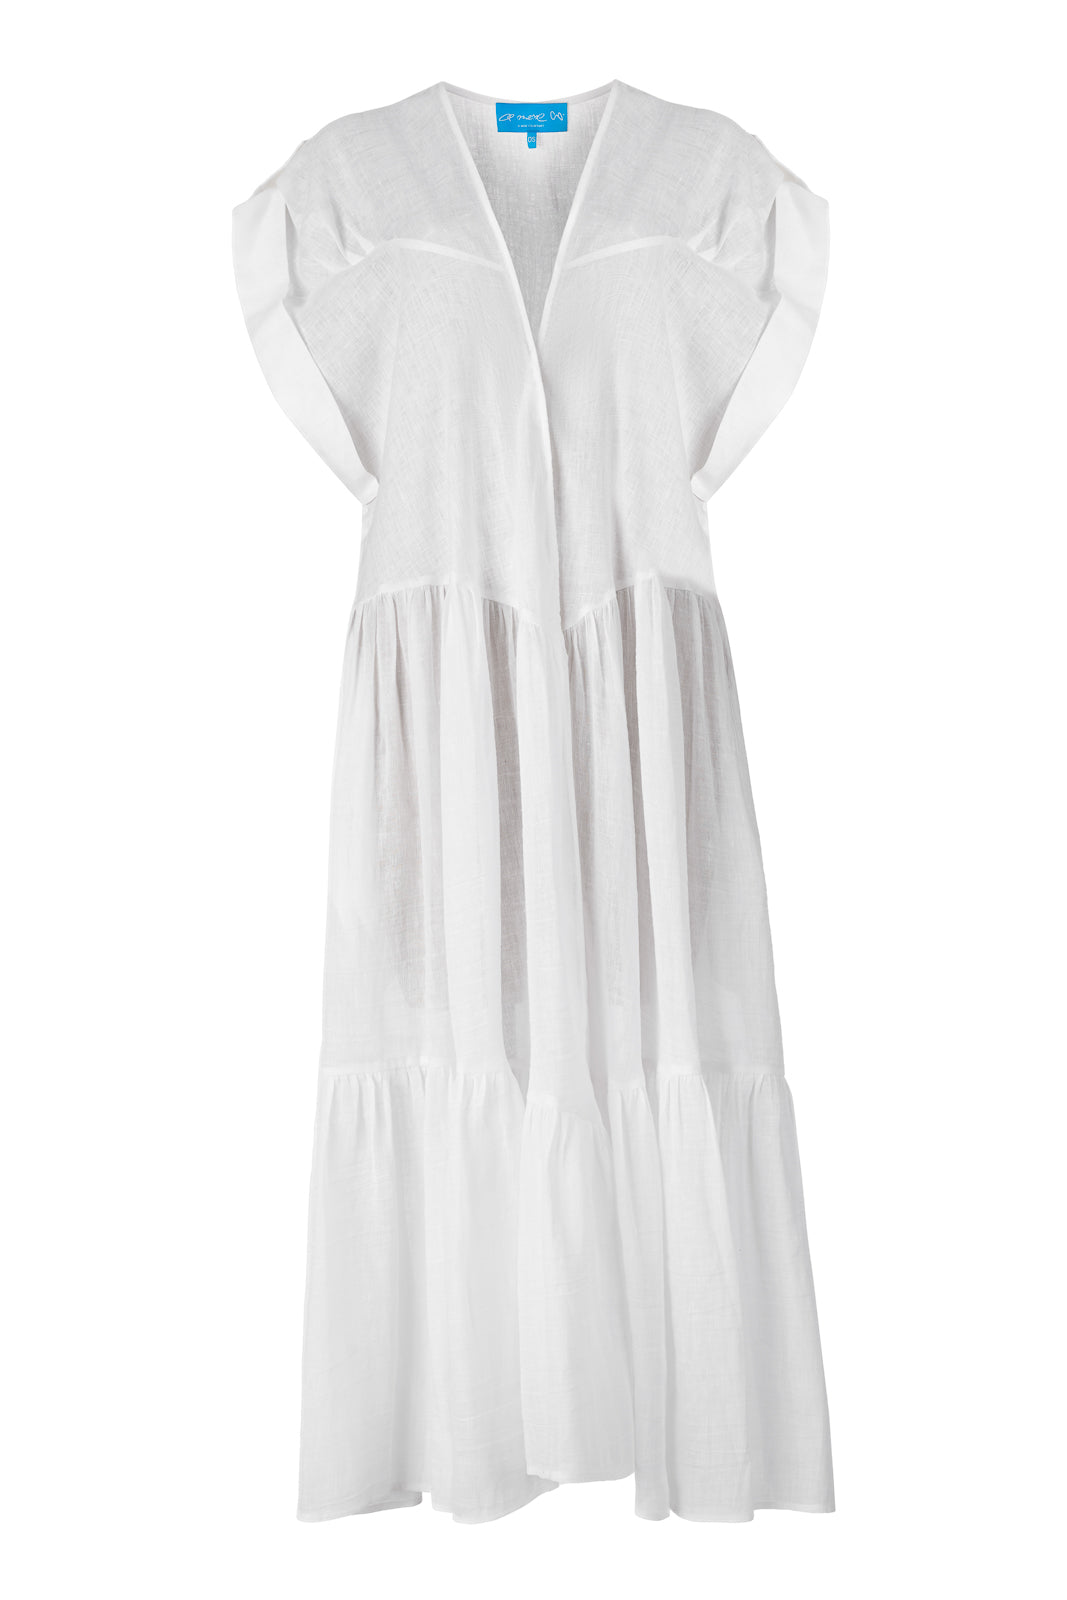 A Mere Co. - Tulum Linen Dress - One Size